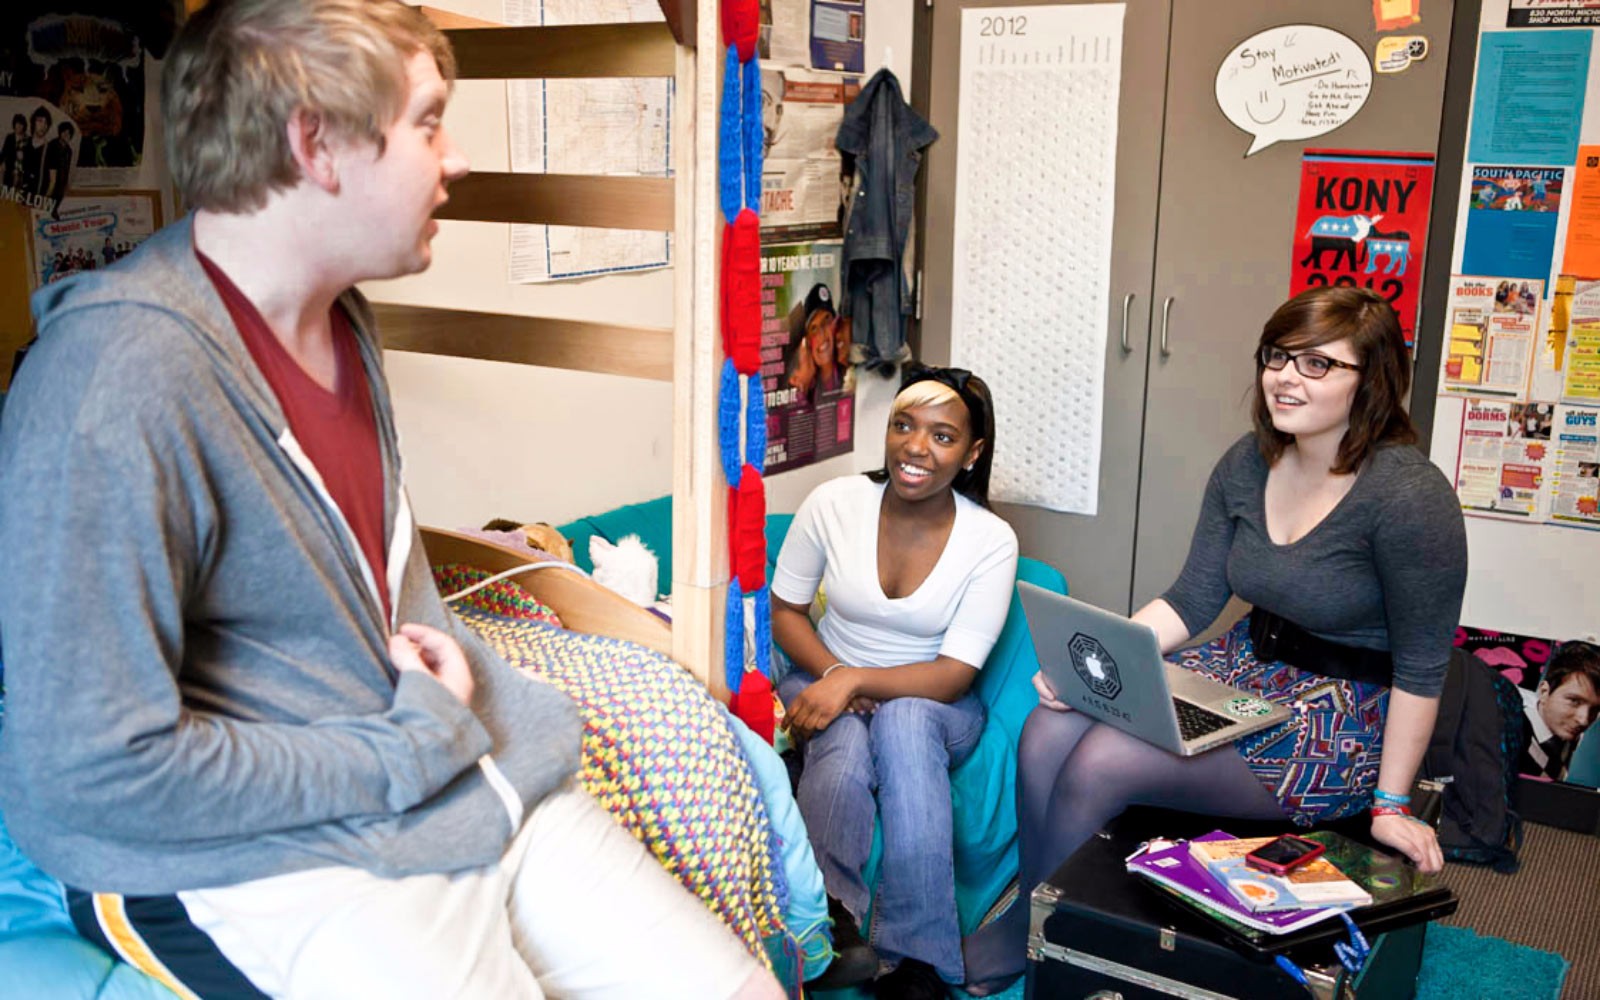 Three students laughing in a dorm room.